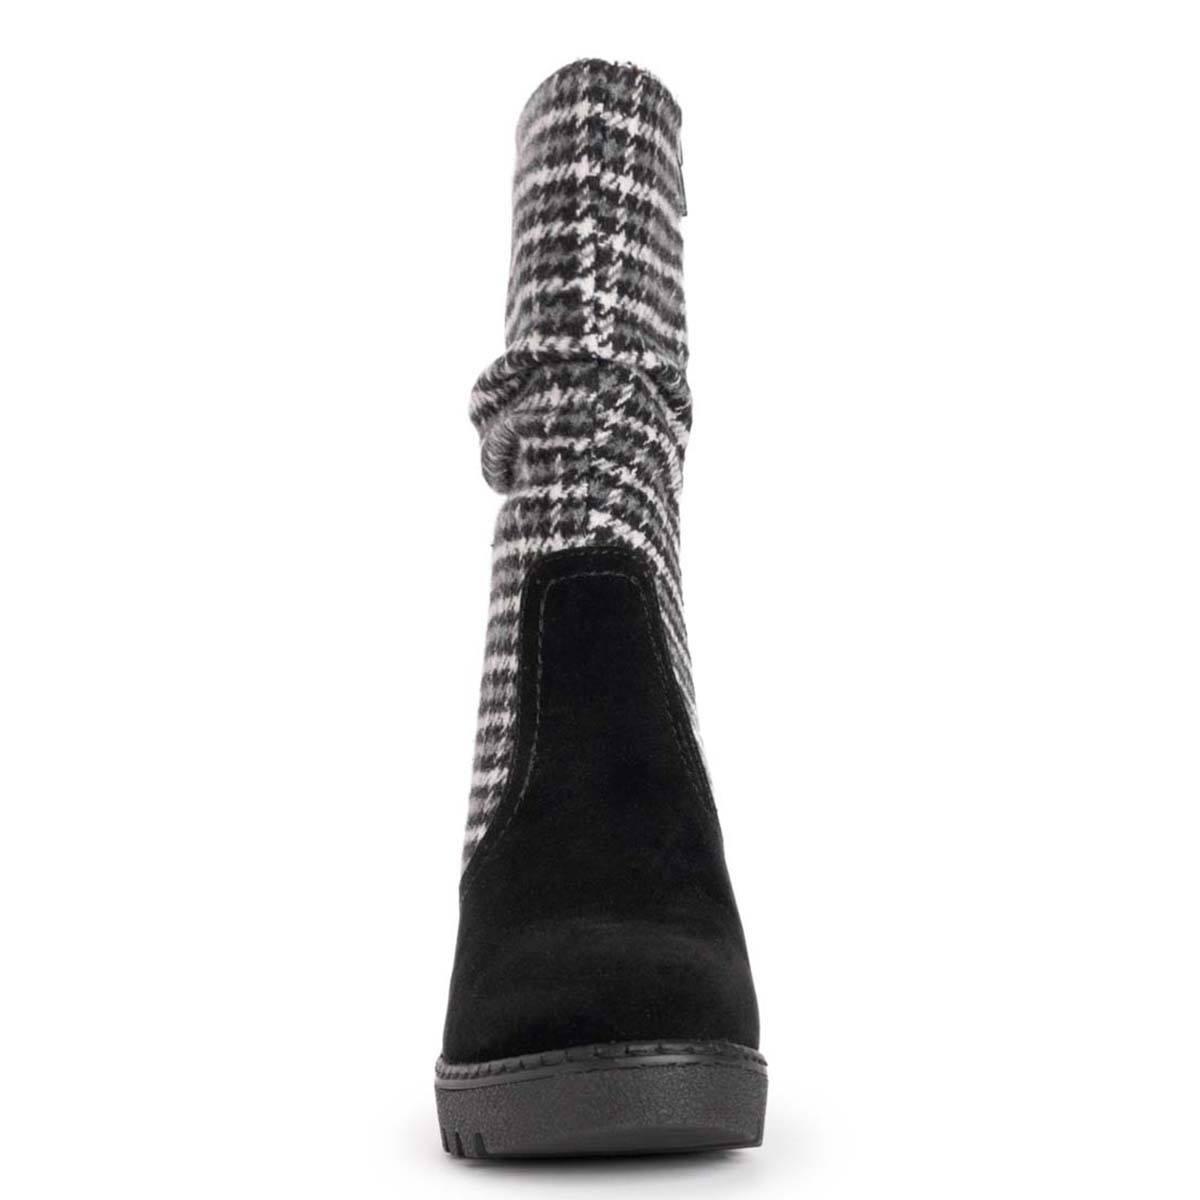 MUK LUKS Vermont Stowe Womens Wedge Boots Black Product Image